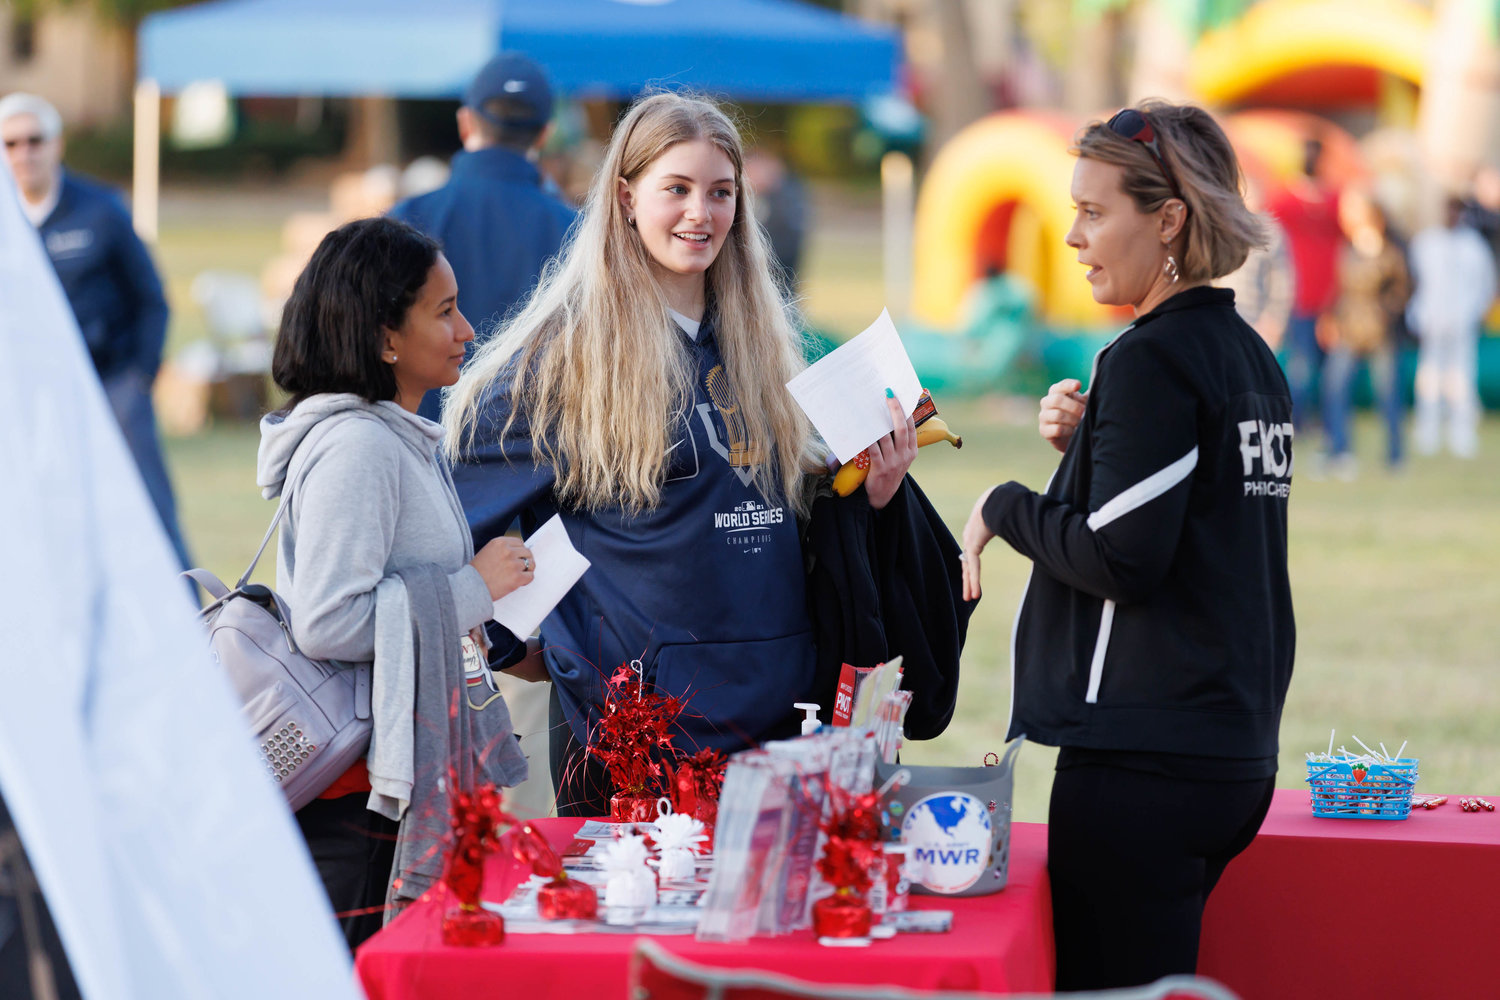 Rosa Creel (L) and Emma Young speak with Anna Miller of the Pivot Physical Therapy booth during the All American Race on Fort Bragg on March 25, 2023.  Tony Wooten/CityView Media